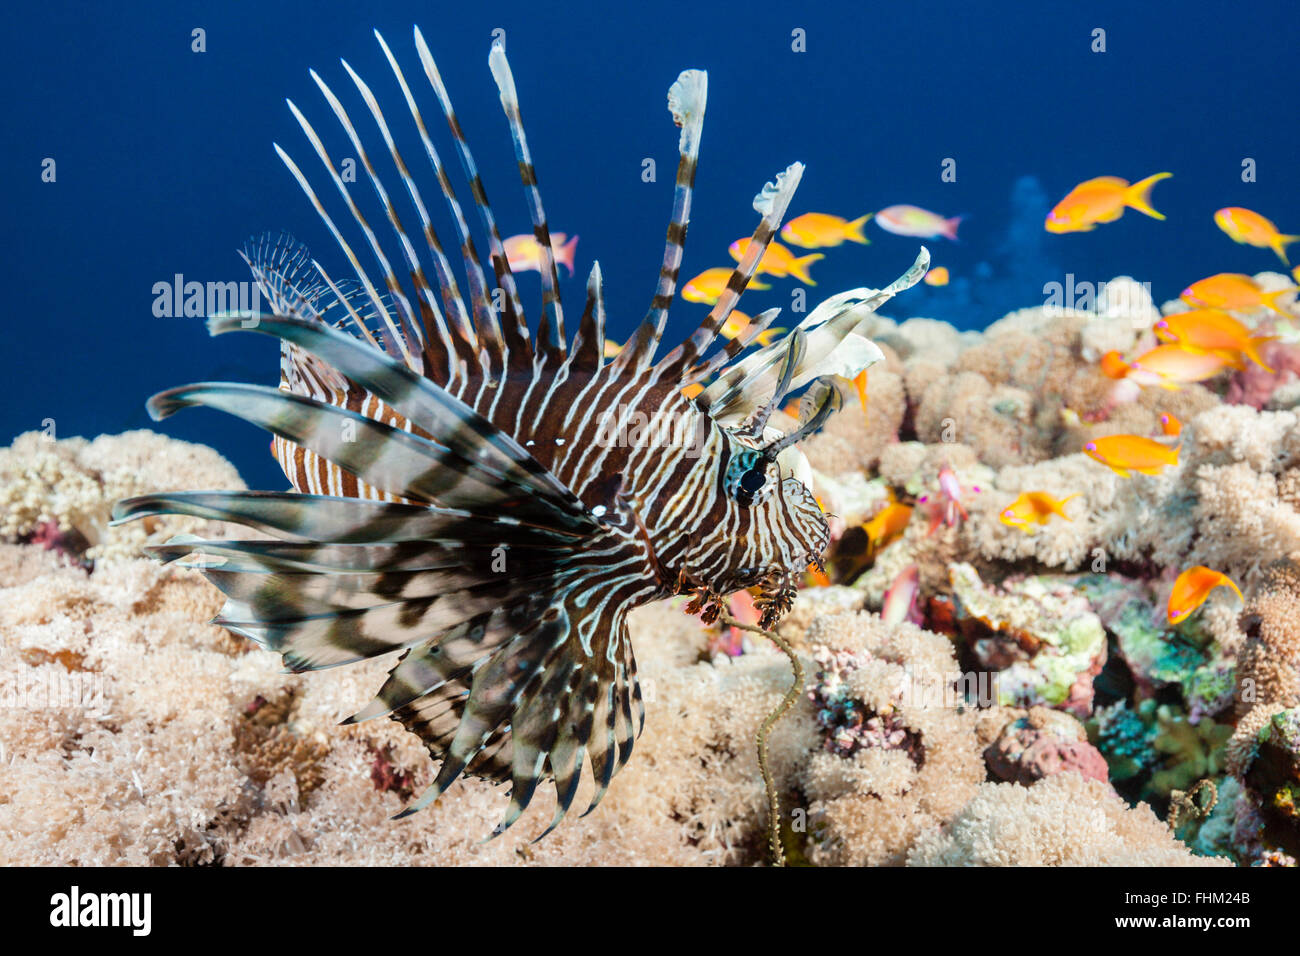 Feuerfische, Pterois Miles, Shaab Rumi, Rotes Meer, Sudan Stockfoto